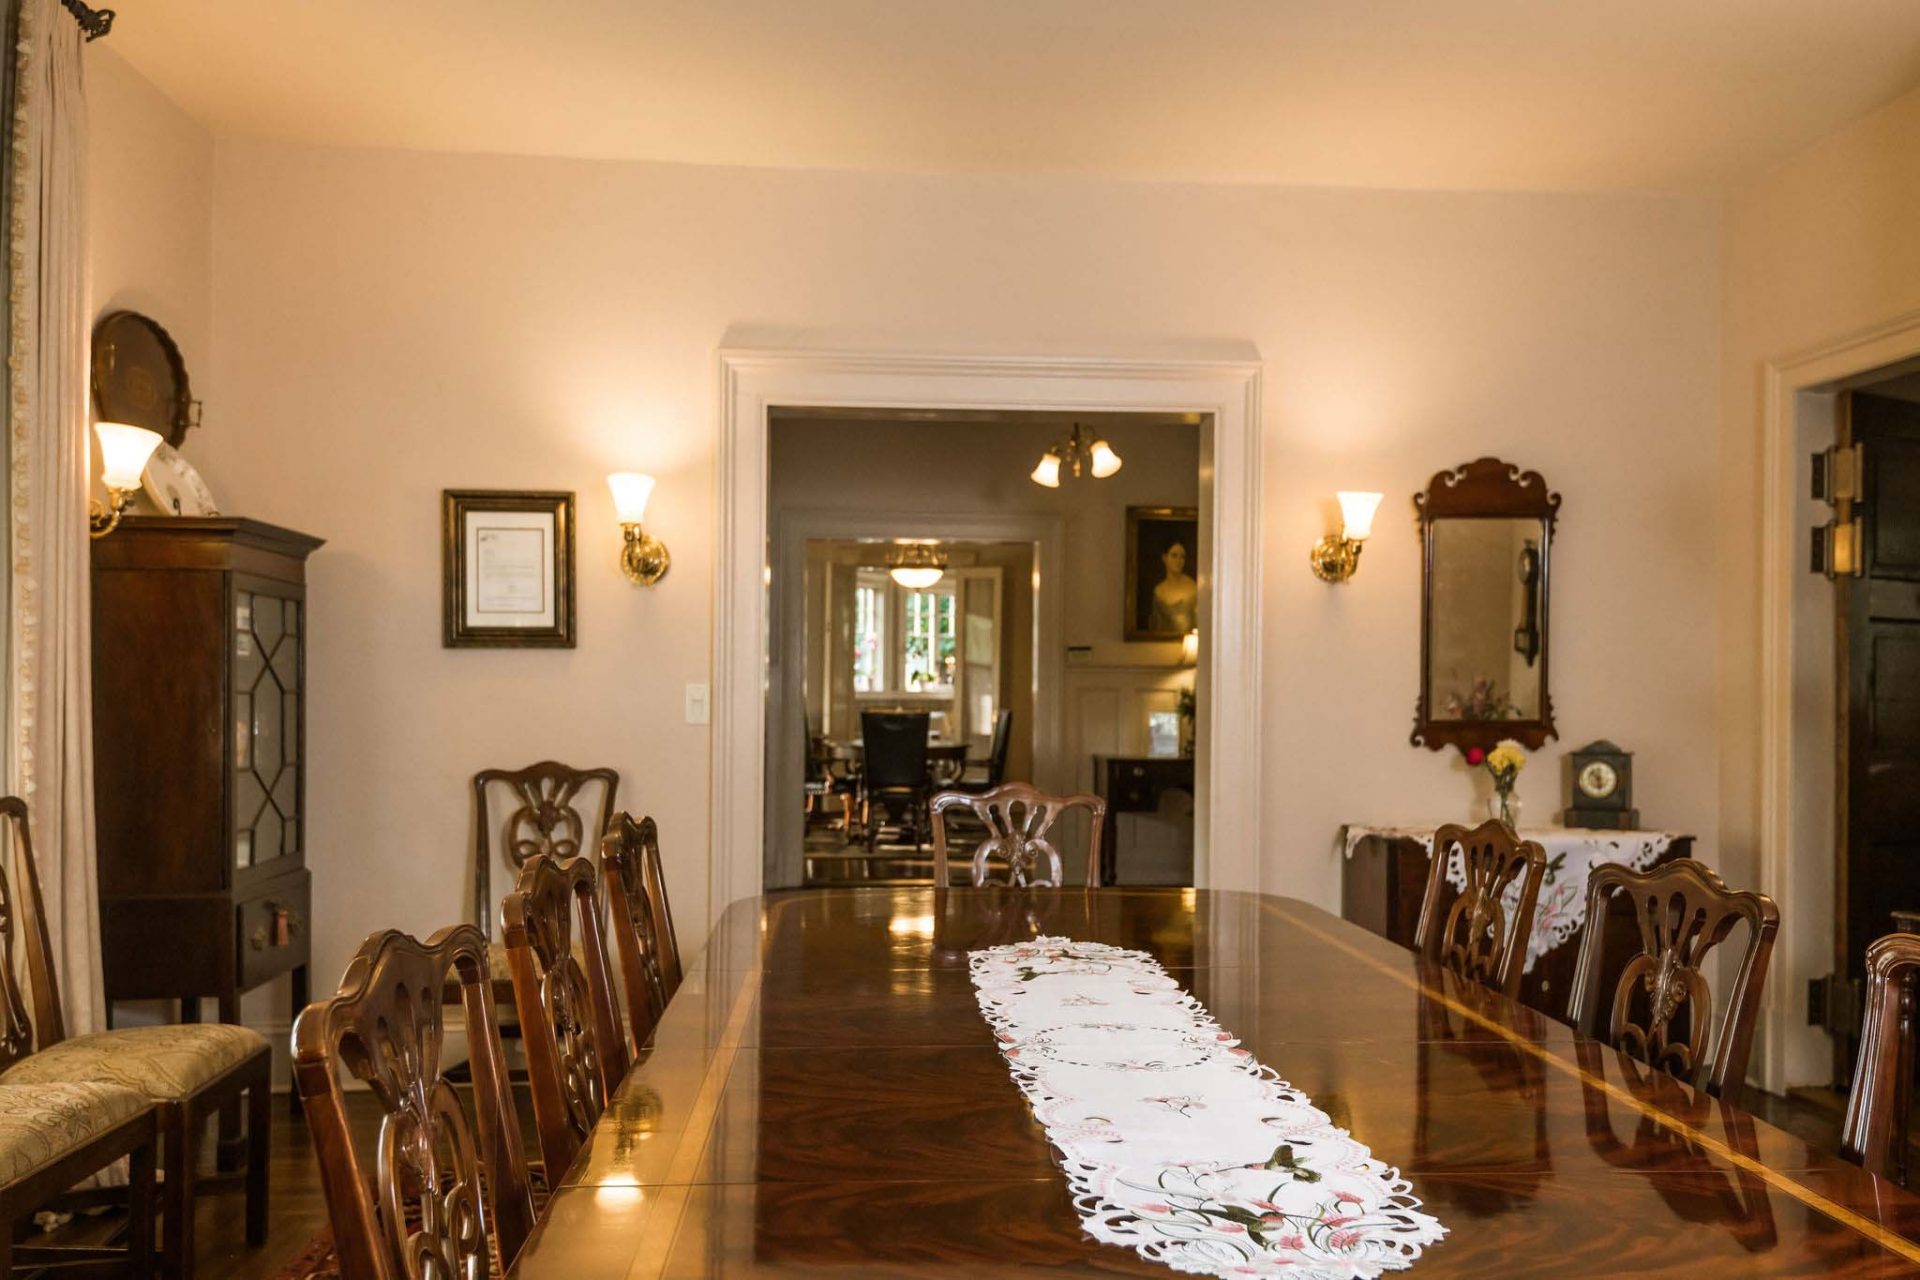 A spacious dining room area with a big, dark wood dining table and wooden chairs, opening onto the Inn's foyer.